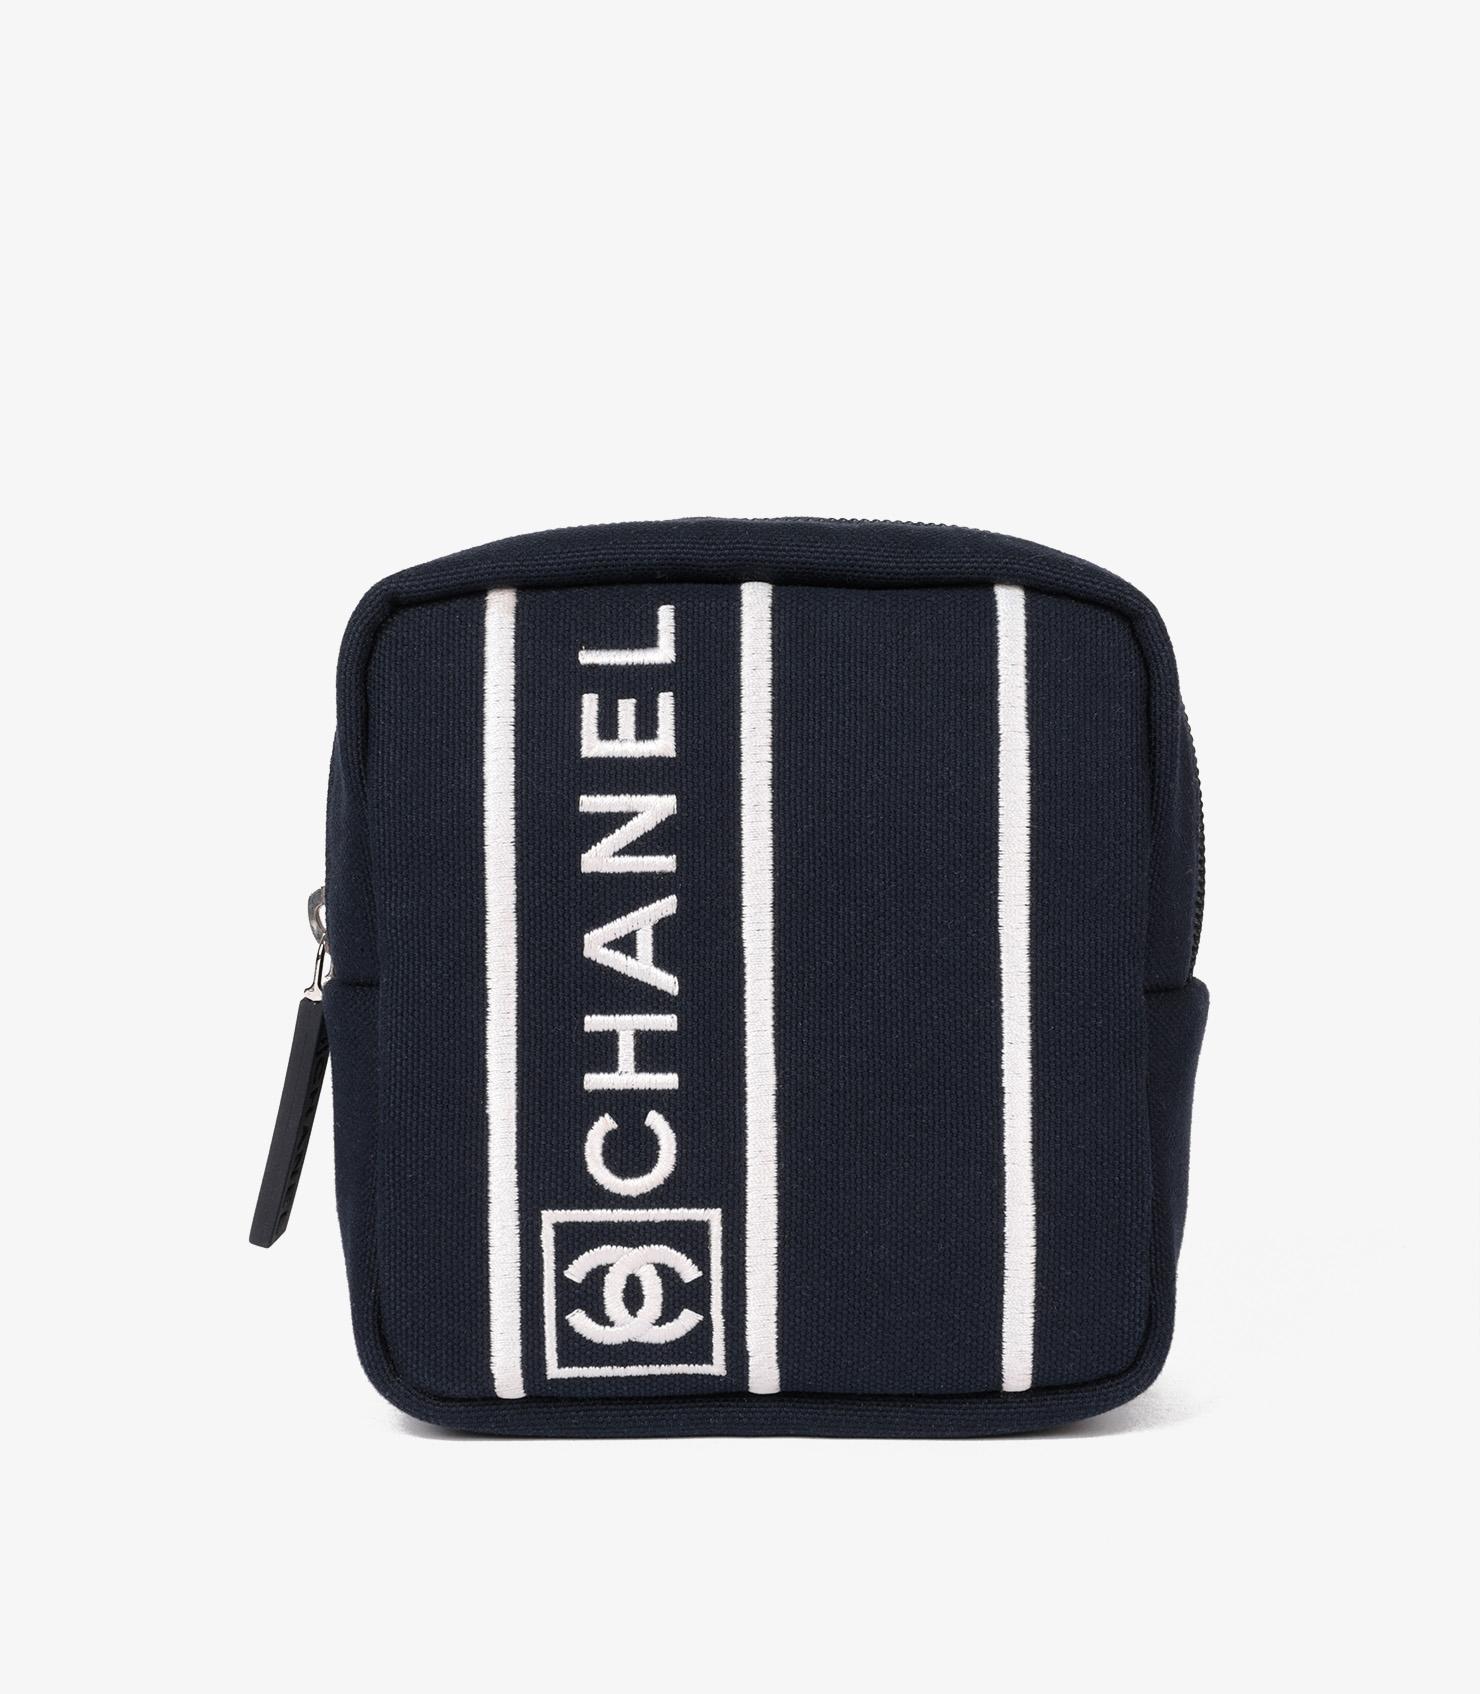 Chanel Navy Canvas Sports Line Tennis Pouch And Balls Set

Brand- Chanel
Model- Sports Line Tennis Pouch and Balls Set
Product Type- Sports Accessory
Accompanied By- Dust Bag
Colour- Navy
Hardware- Silver
Material(s)- Canvas

Height- 15cm
Width-